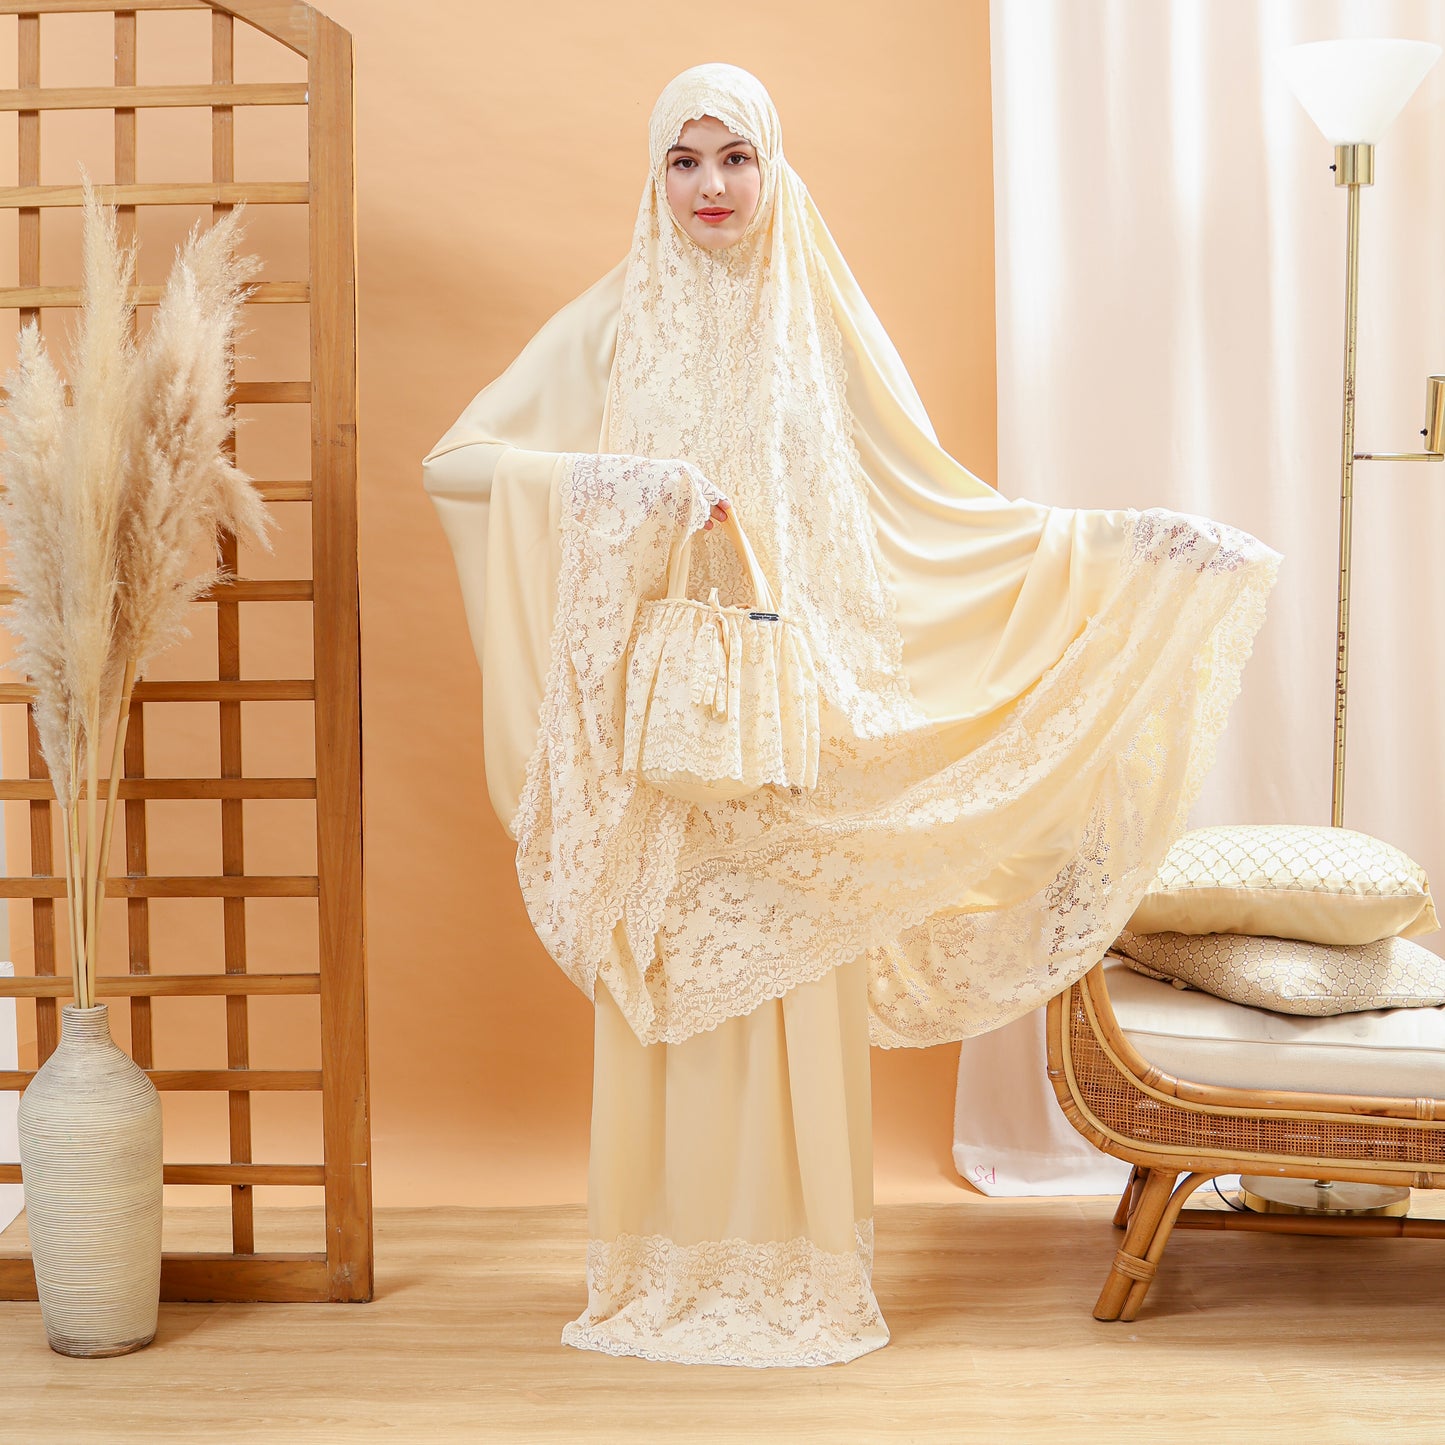 Ladies Silk Prayer Clothes with Lace - Pastel Yellow